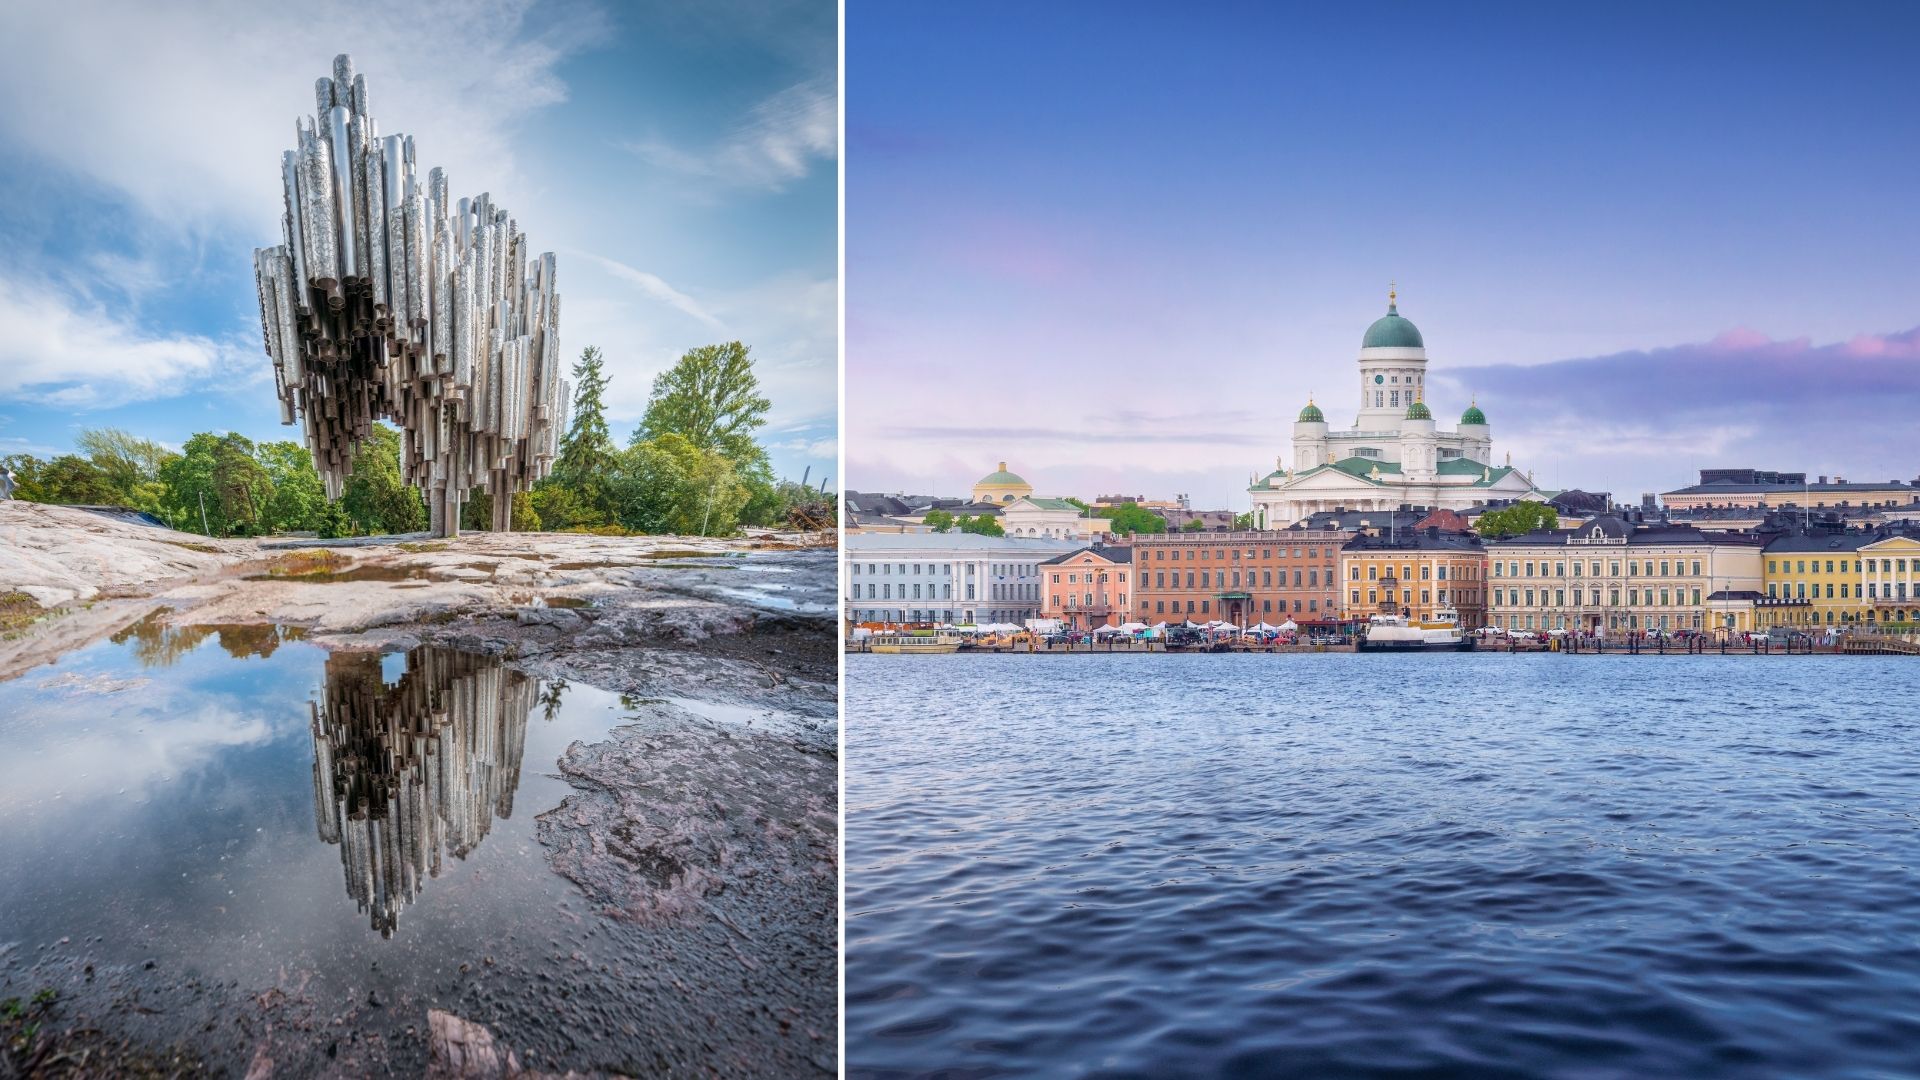 Private jet charter to Scandinavia for an exclusive nordic adventure, exploring art and culture in Scandinavia, and witnessing the northern lights.